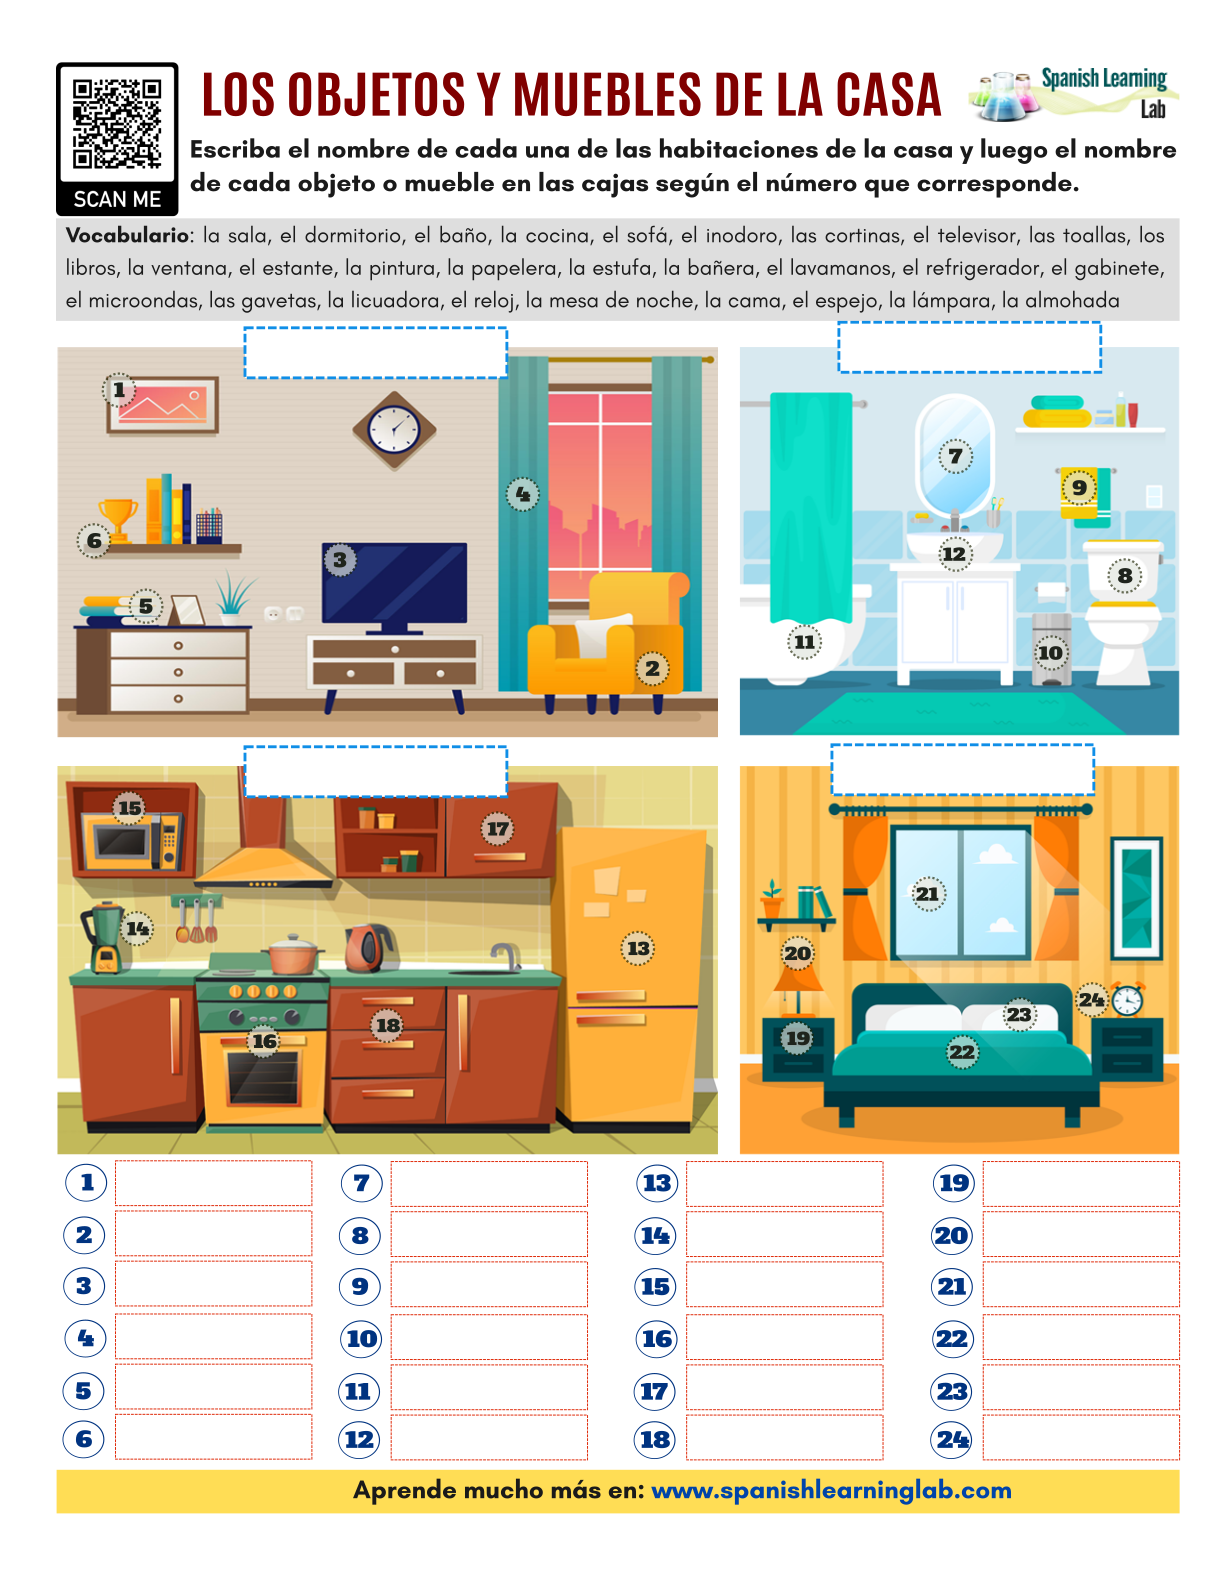 https://www.spanishlearninglab.com/wp-content/uploads/2021/03/house-objects-and-furniture-in-Spanish-pdf-worksheet-objetos-de-la-casa-y-muebles-en-espanol-ejercicios.png